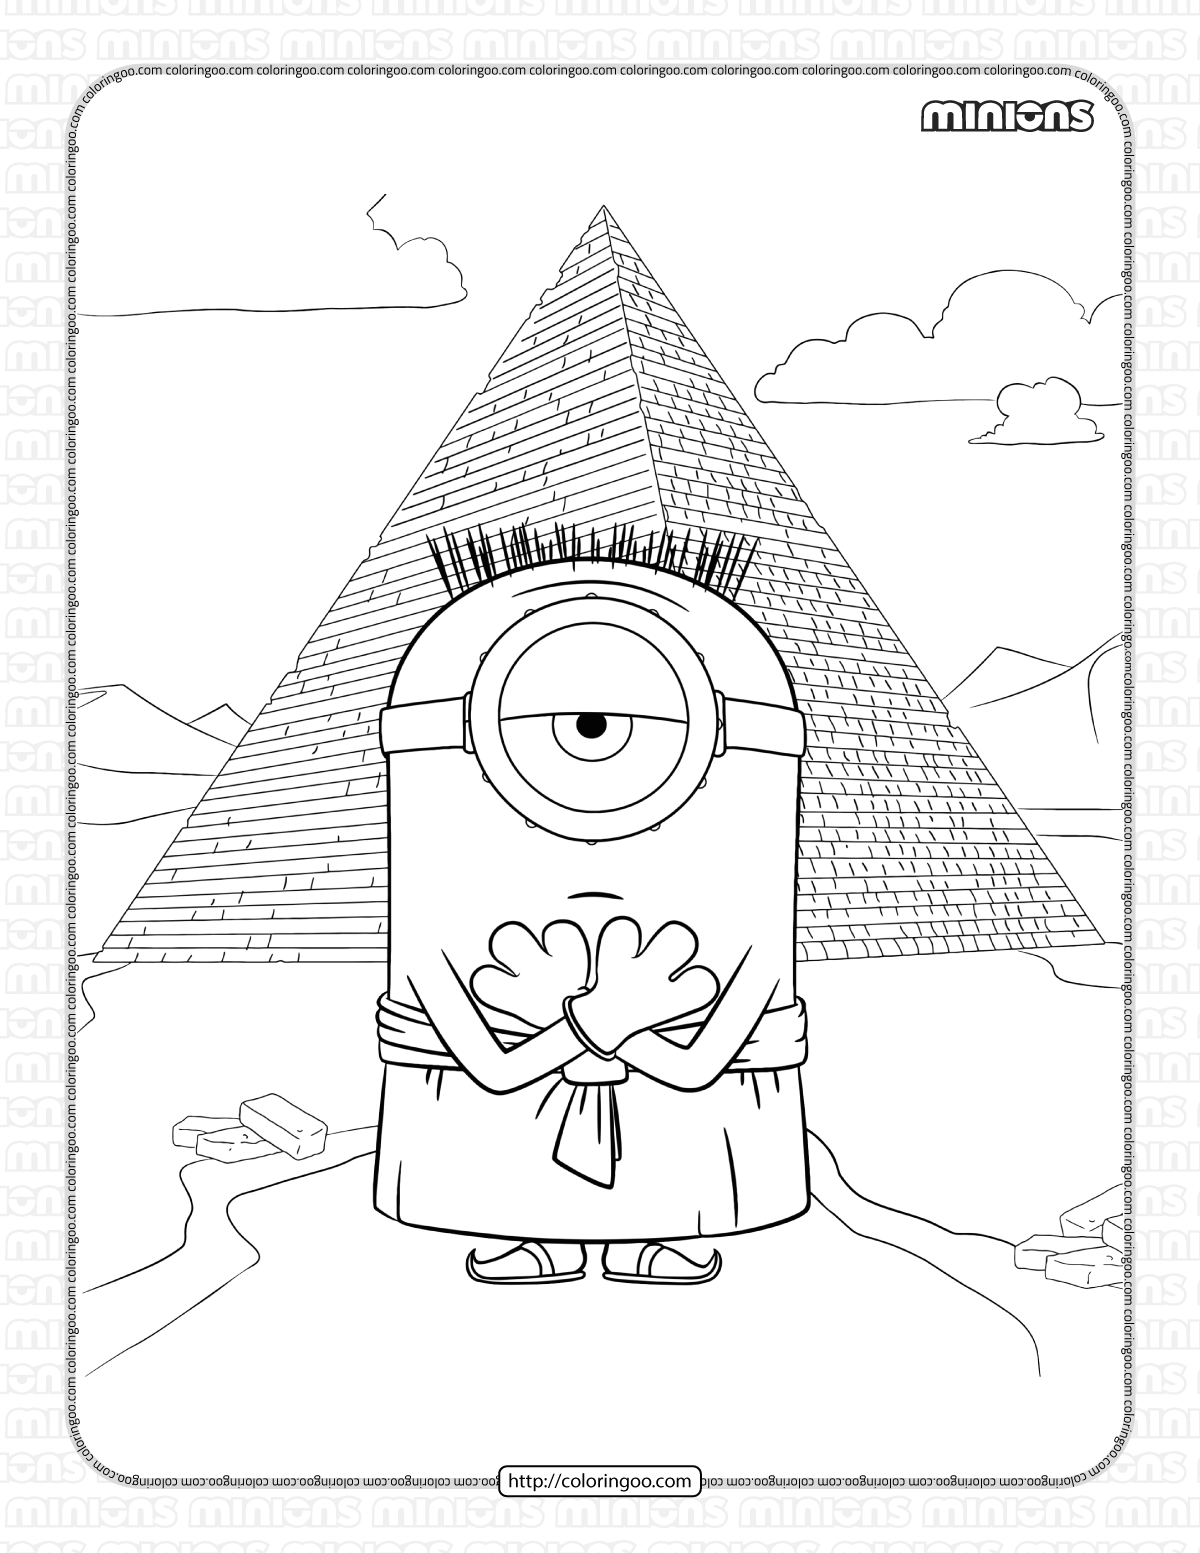 Minion Chris in the Egyption Pyramids Coloring Page